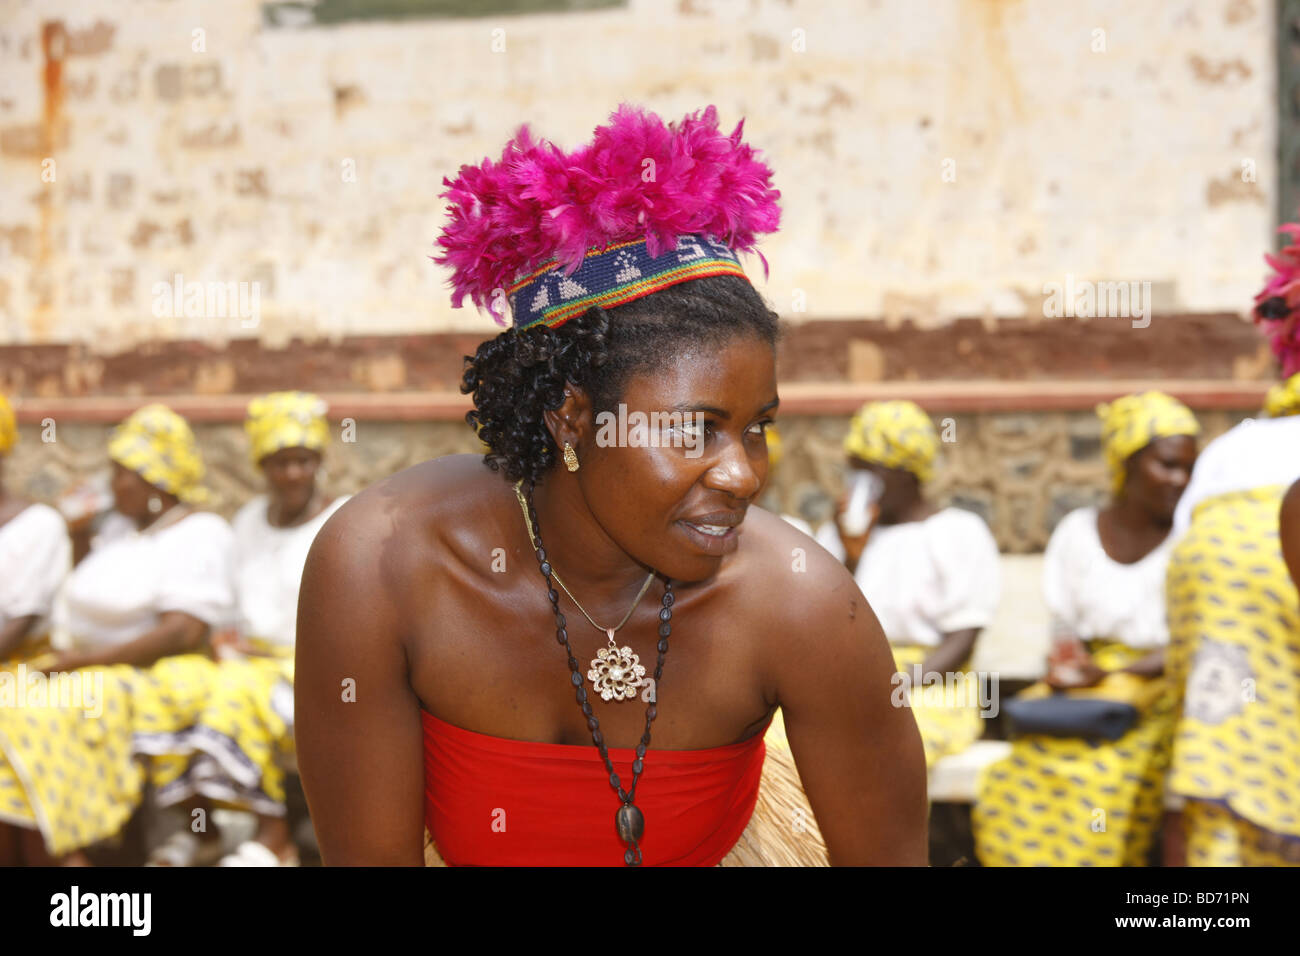 Woman performing a traditional dance, chief farmstead of the Fon, Bafut, West Cameroon, Cameroon, Africa Stock Photo